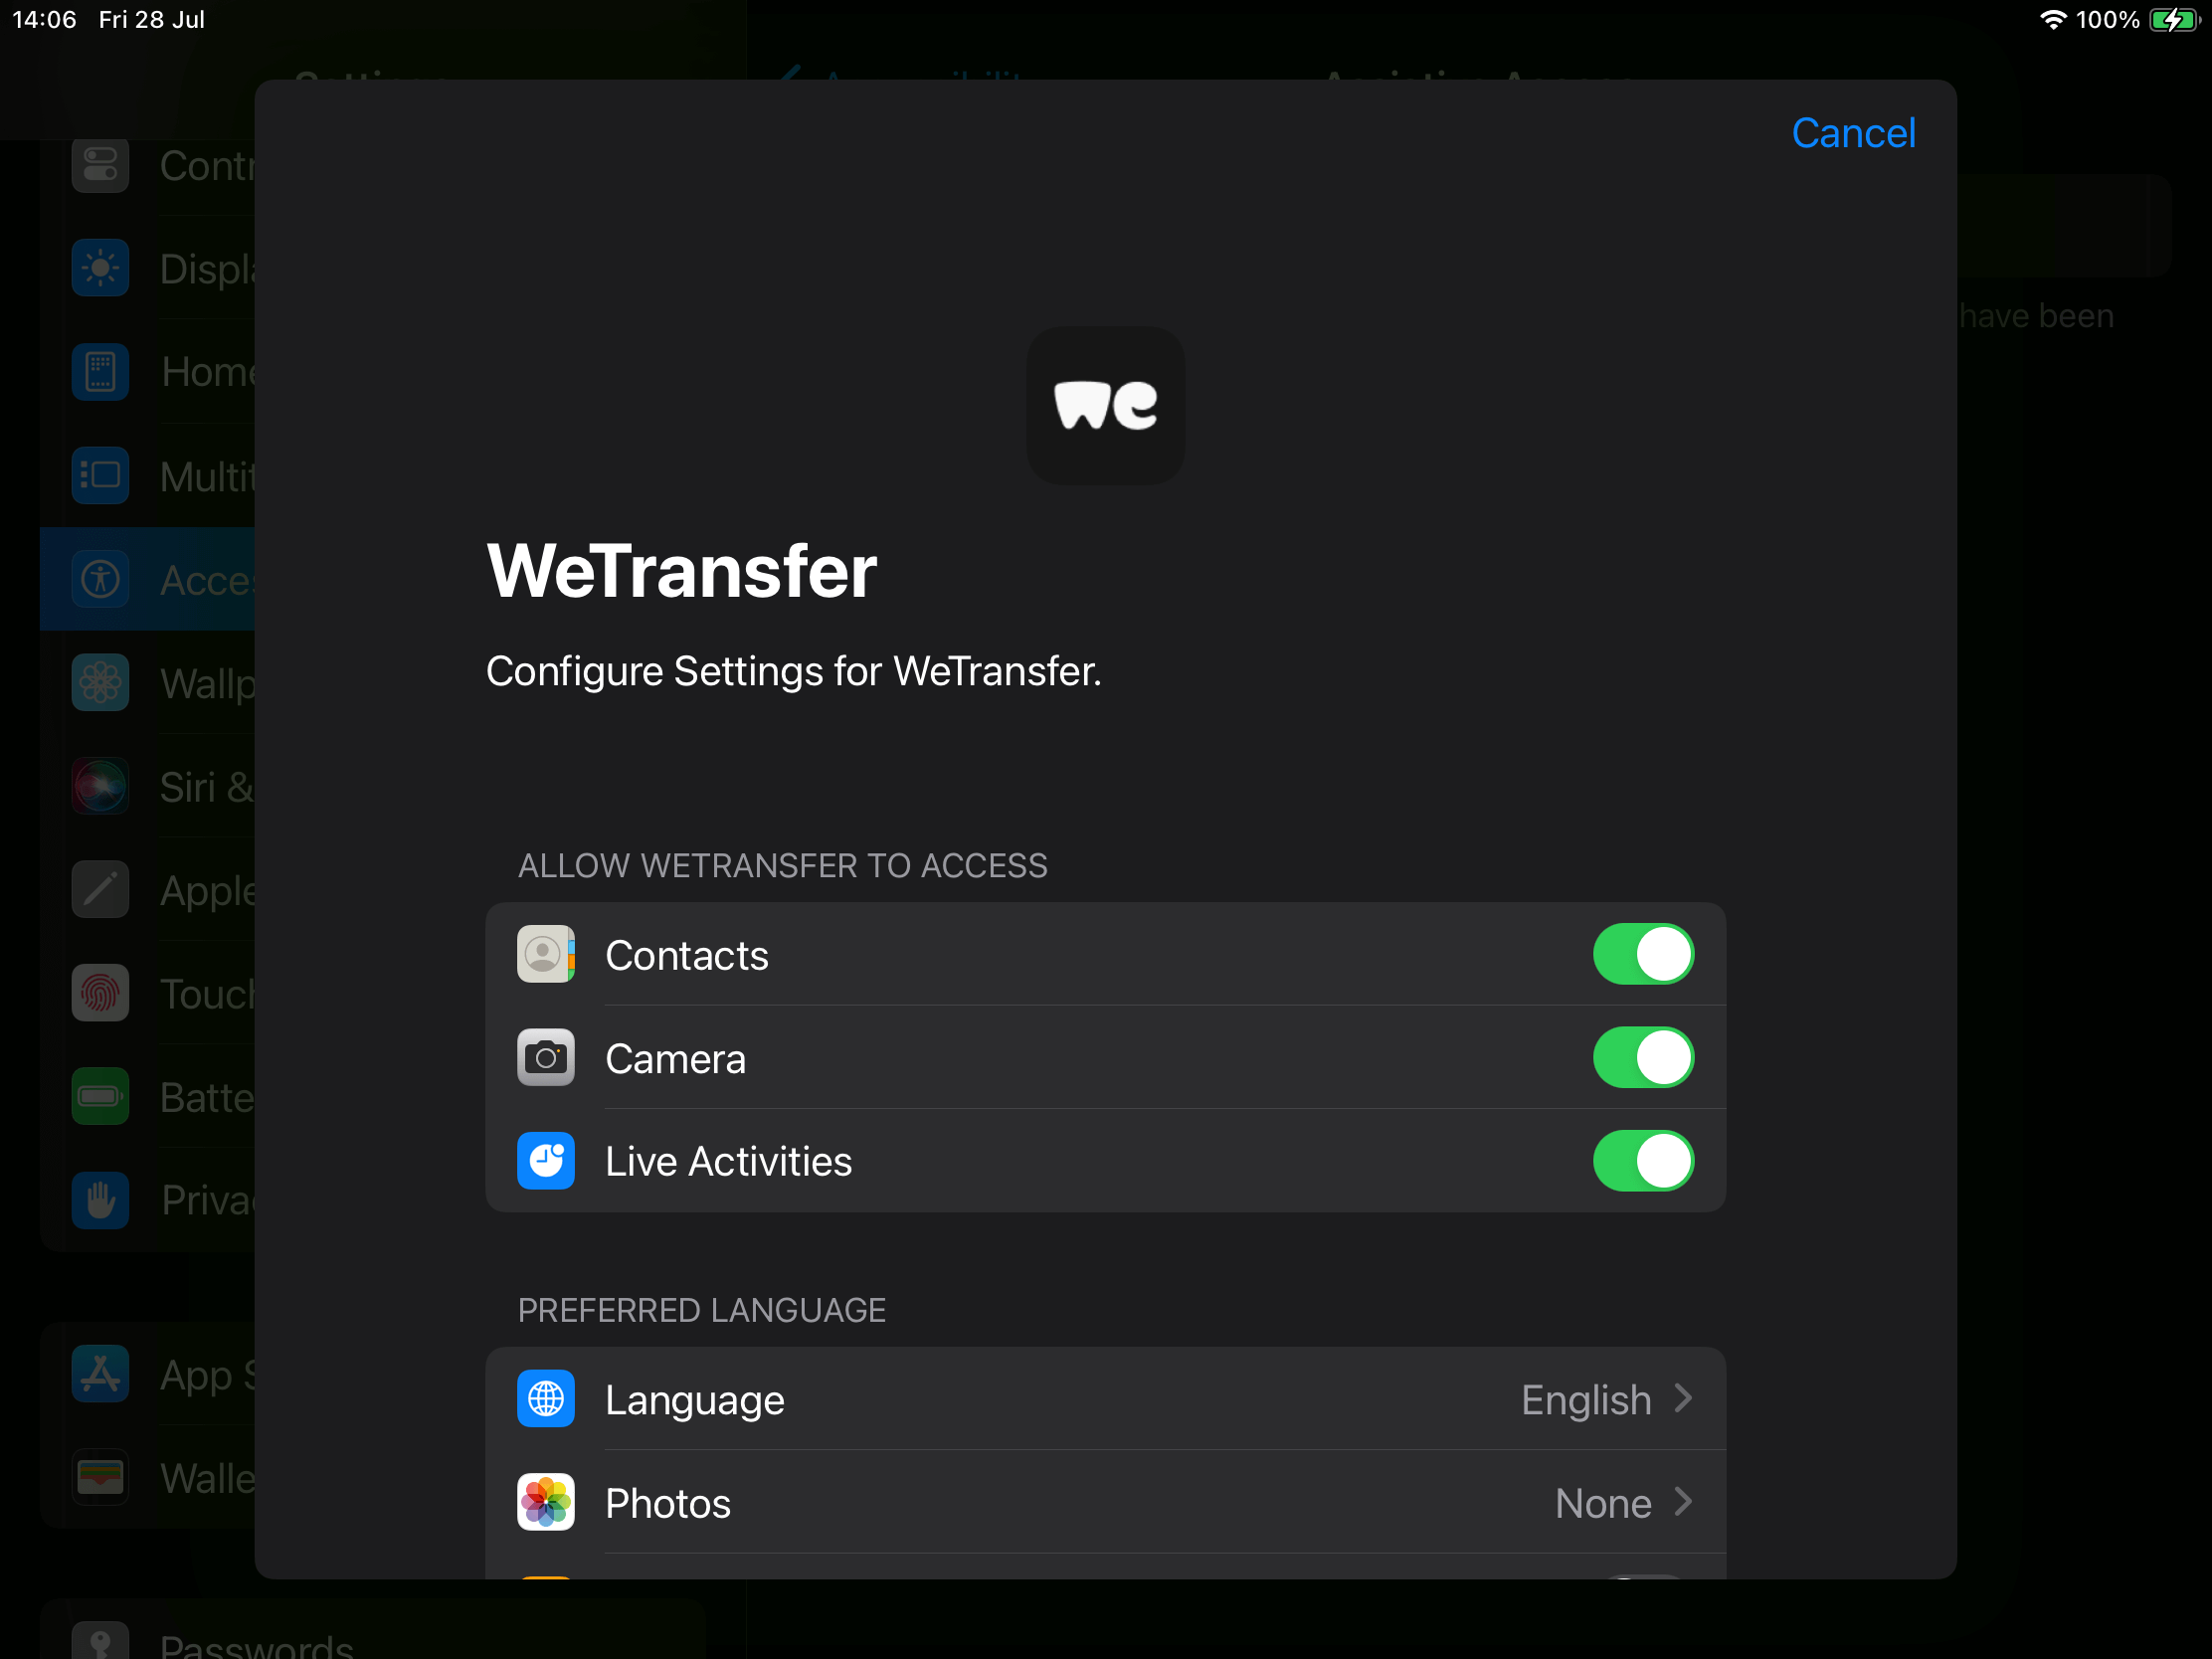 An iPad in landscape mode showing the WeTransfer app's setting configuration screen. It shows options like disabling access to the camera, setting its language, and more.